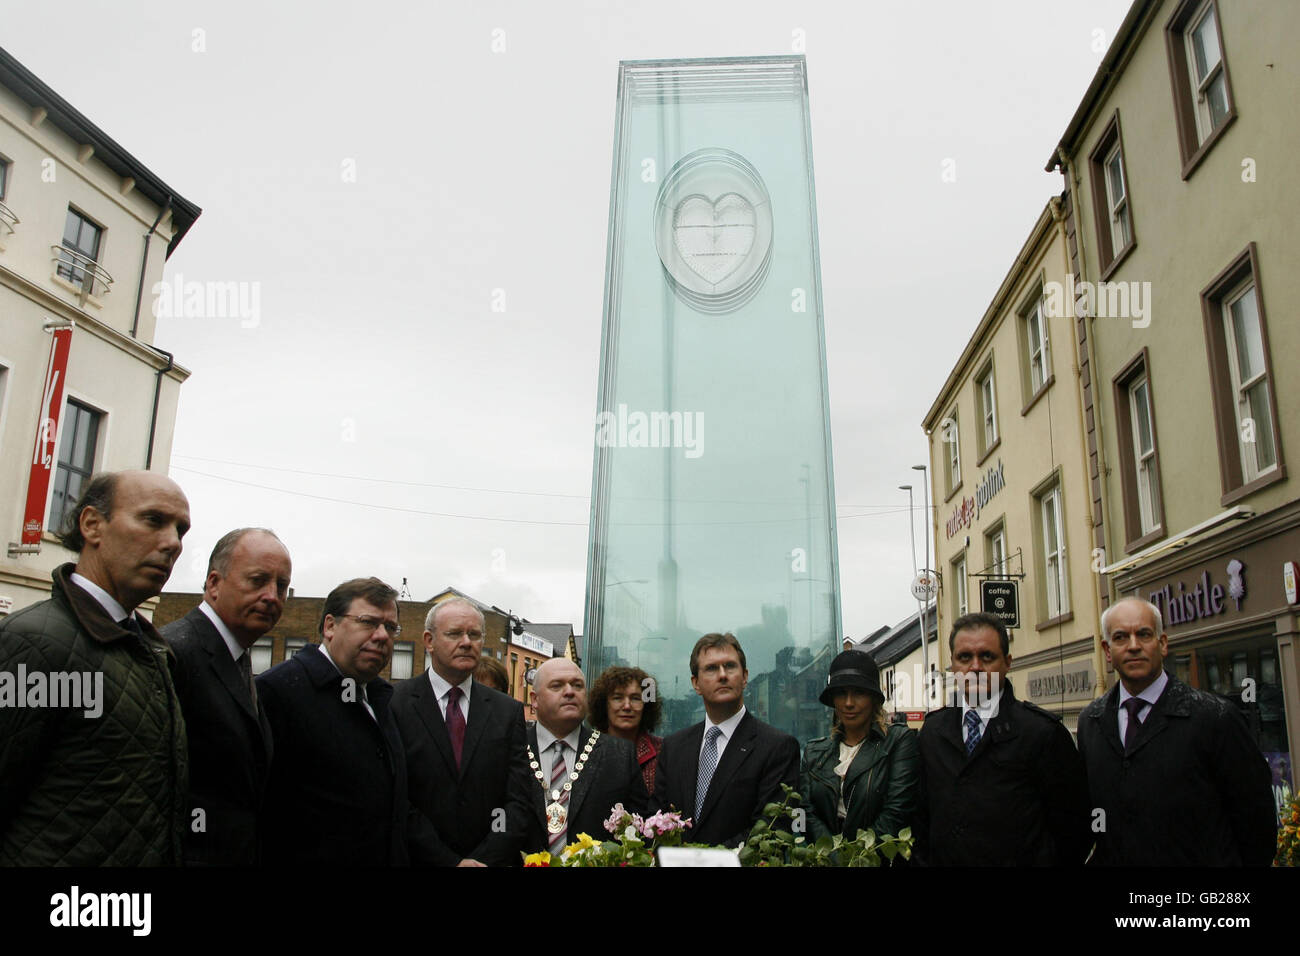 Secretary of State for Northern Ireland Shaun Woodward (second from left), Irish Taoiseach Brian Cowen (third from left) joined other delegates at the site of the 1998 Omagh bomb, in Northern Ireland. Stock Photo